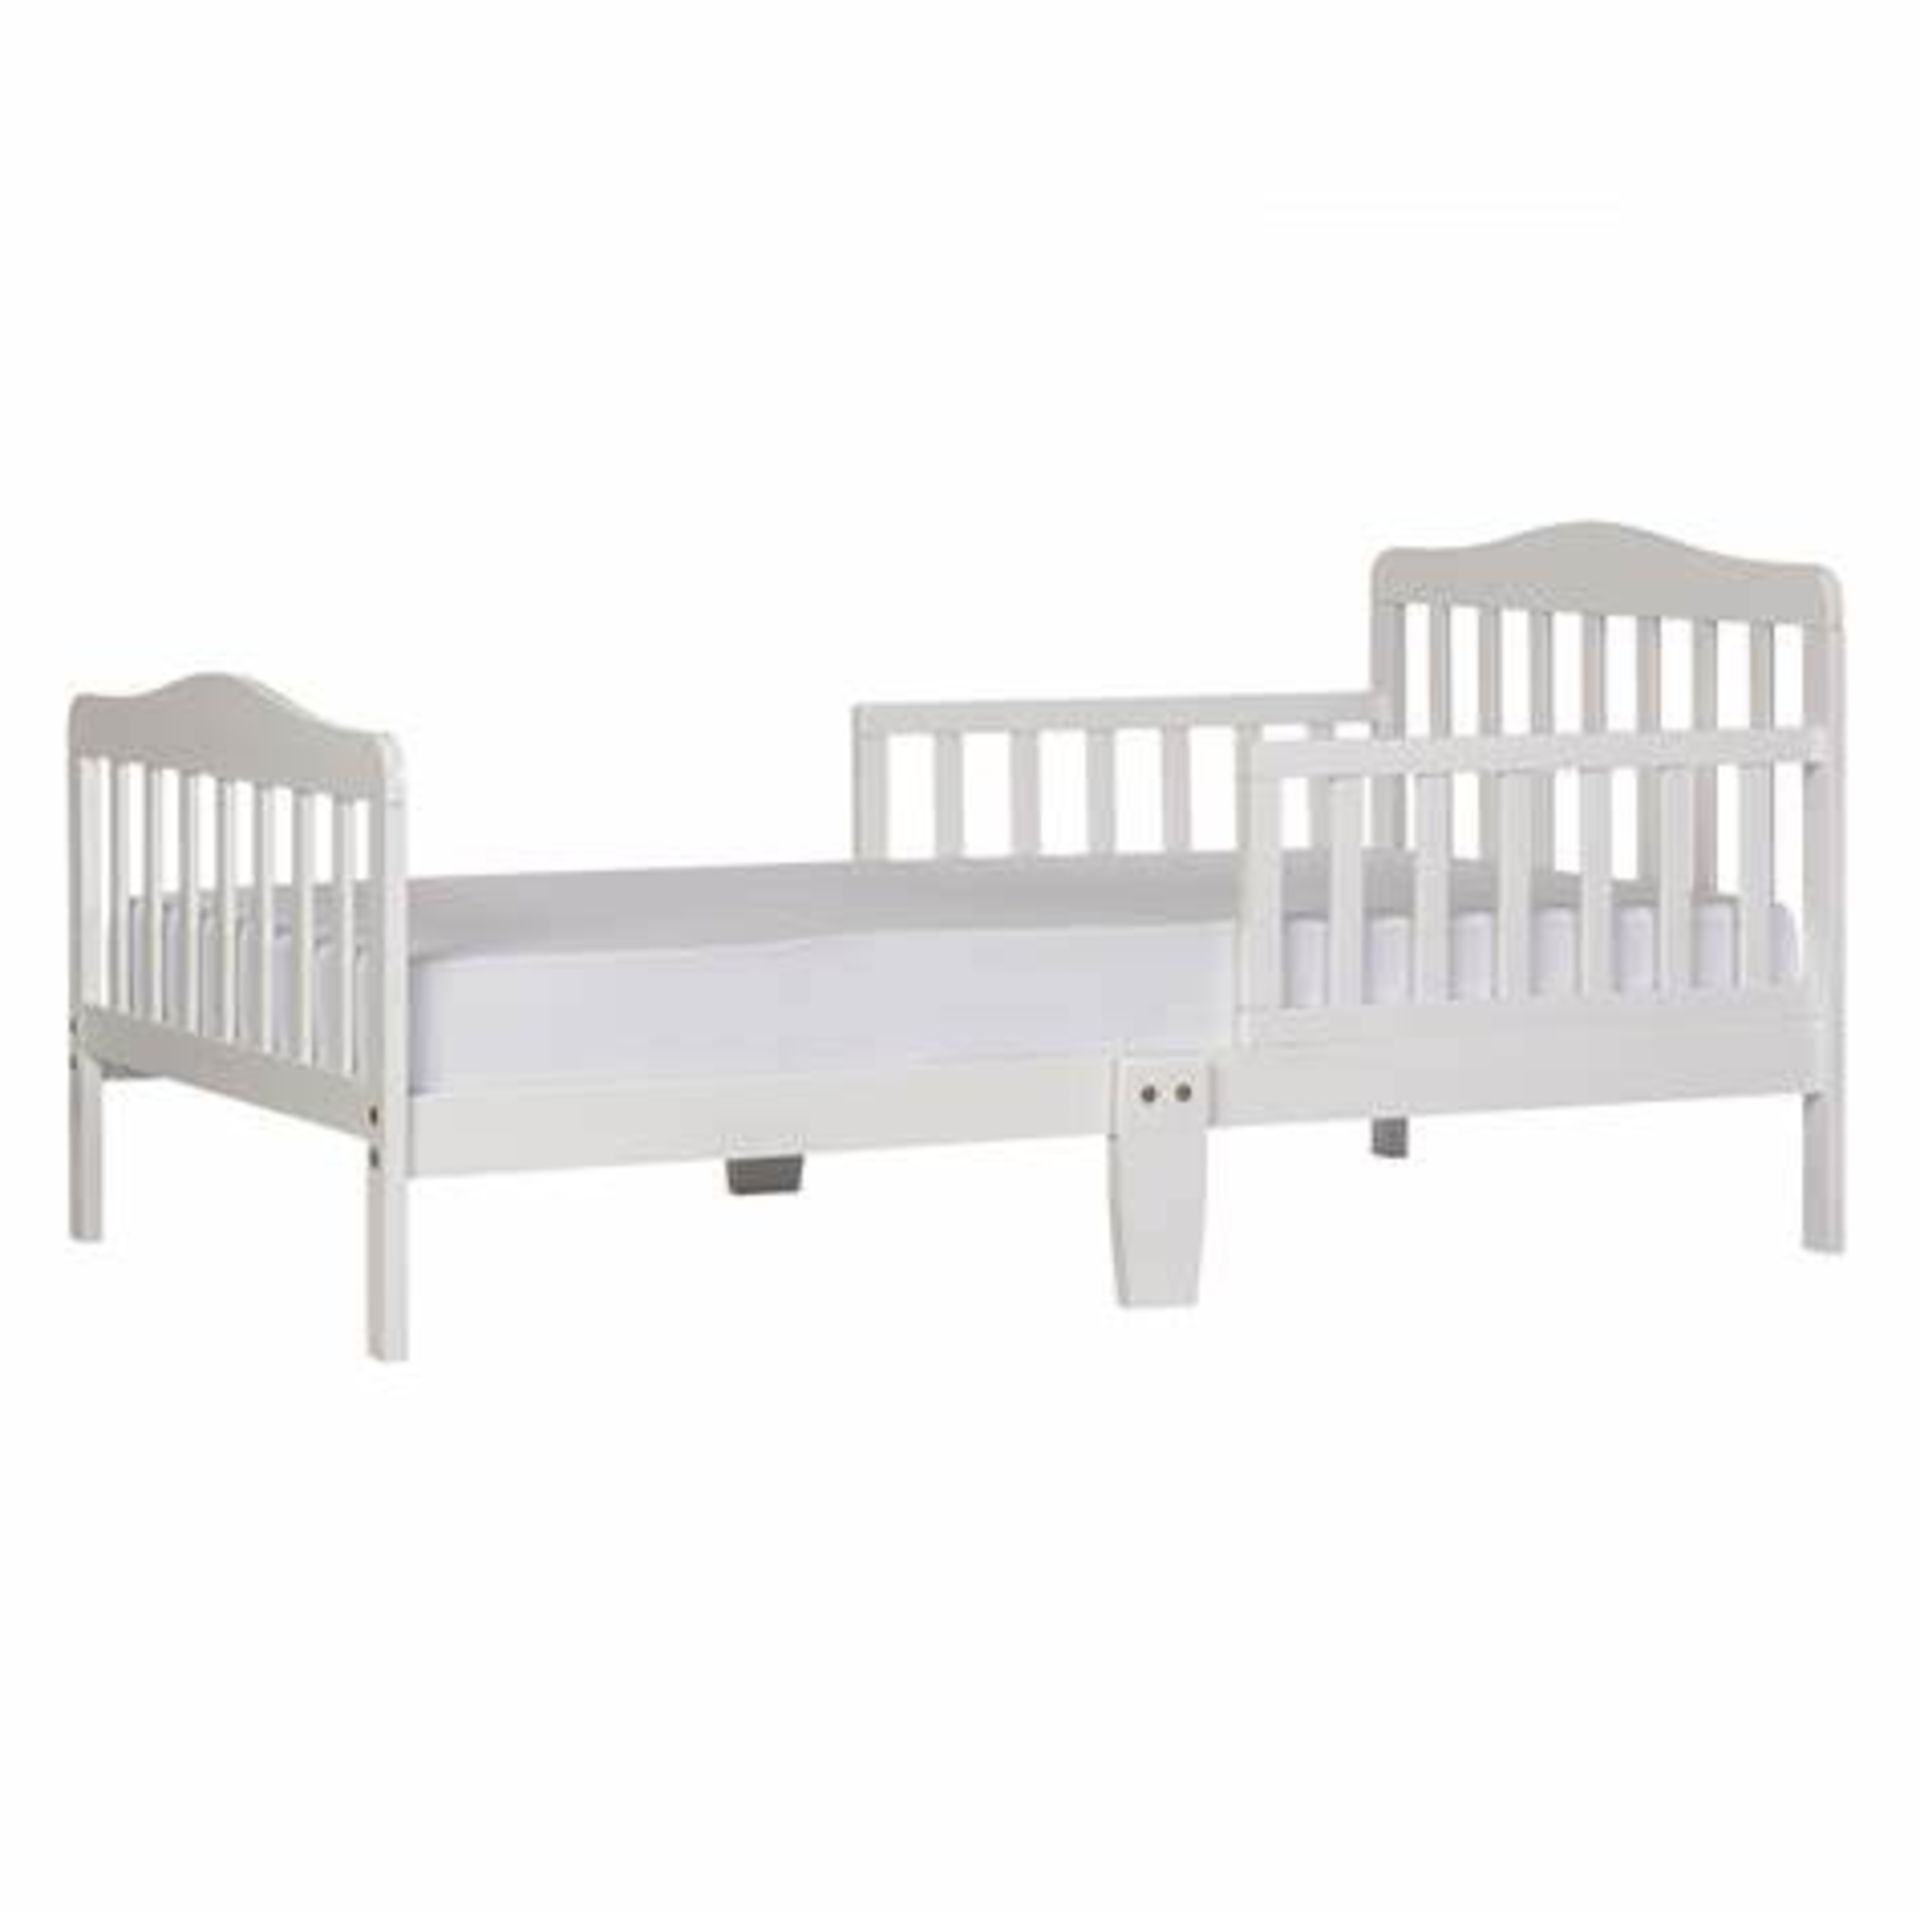 Brand New Dream on Me Classic Toddler Bed. Product dimensionS - 144.8L x 71.1W x 76.2H CM Comes with - Bild 4 aus 5